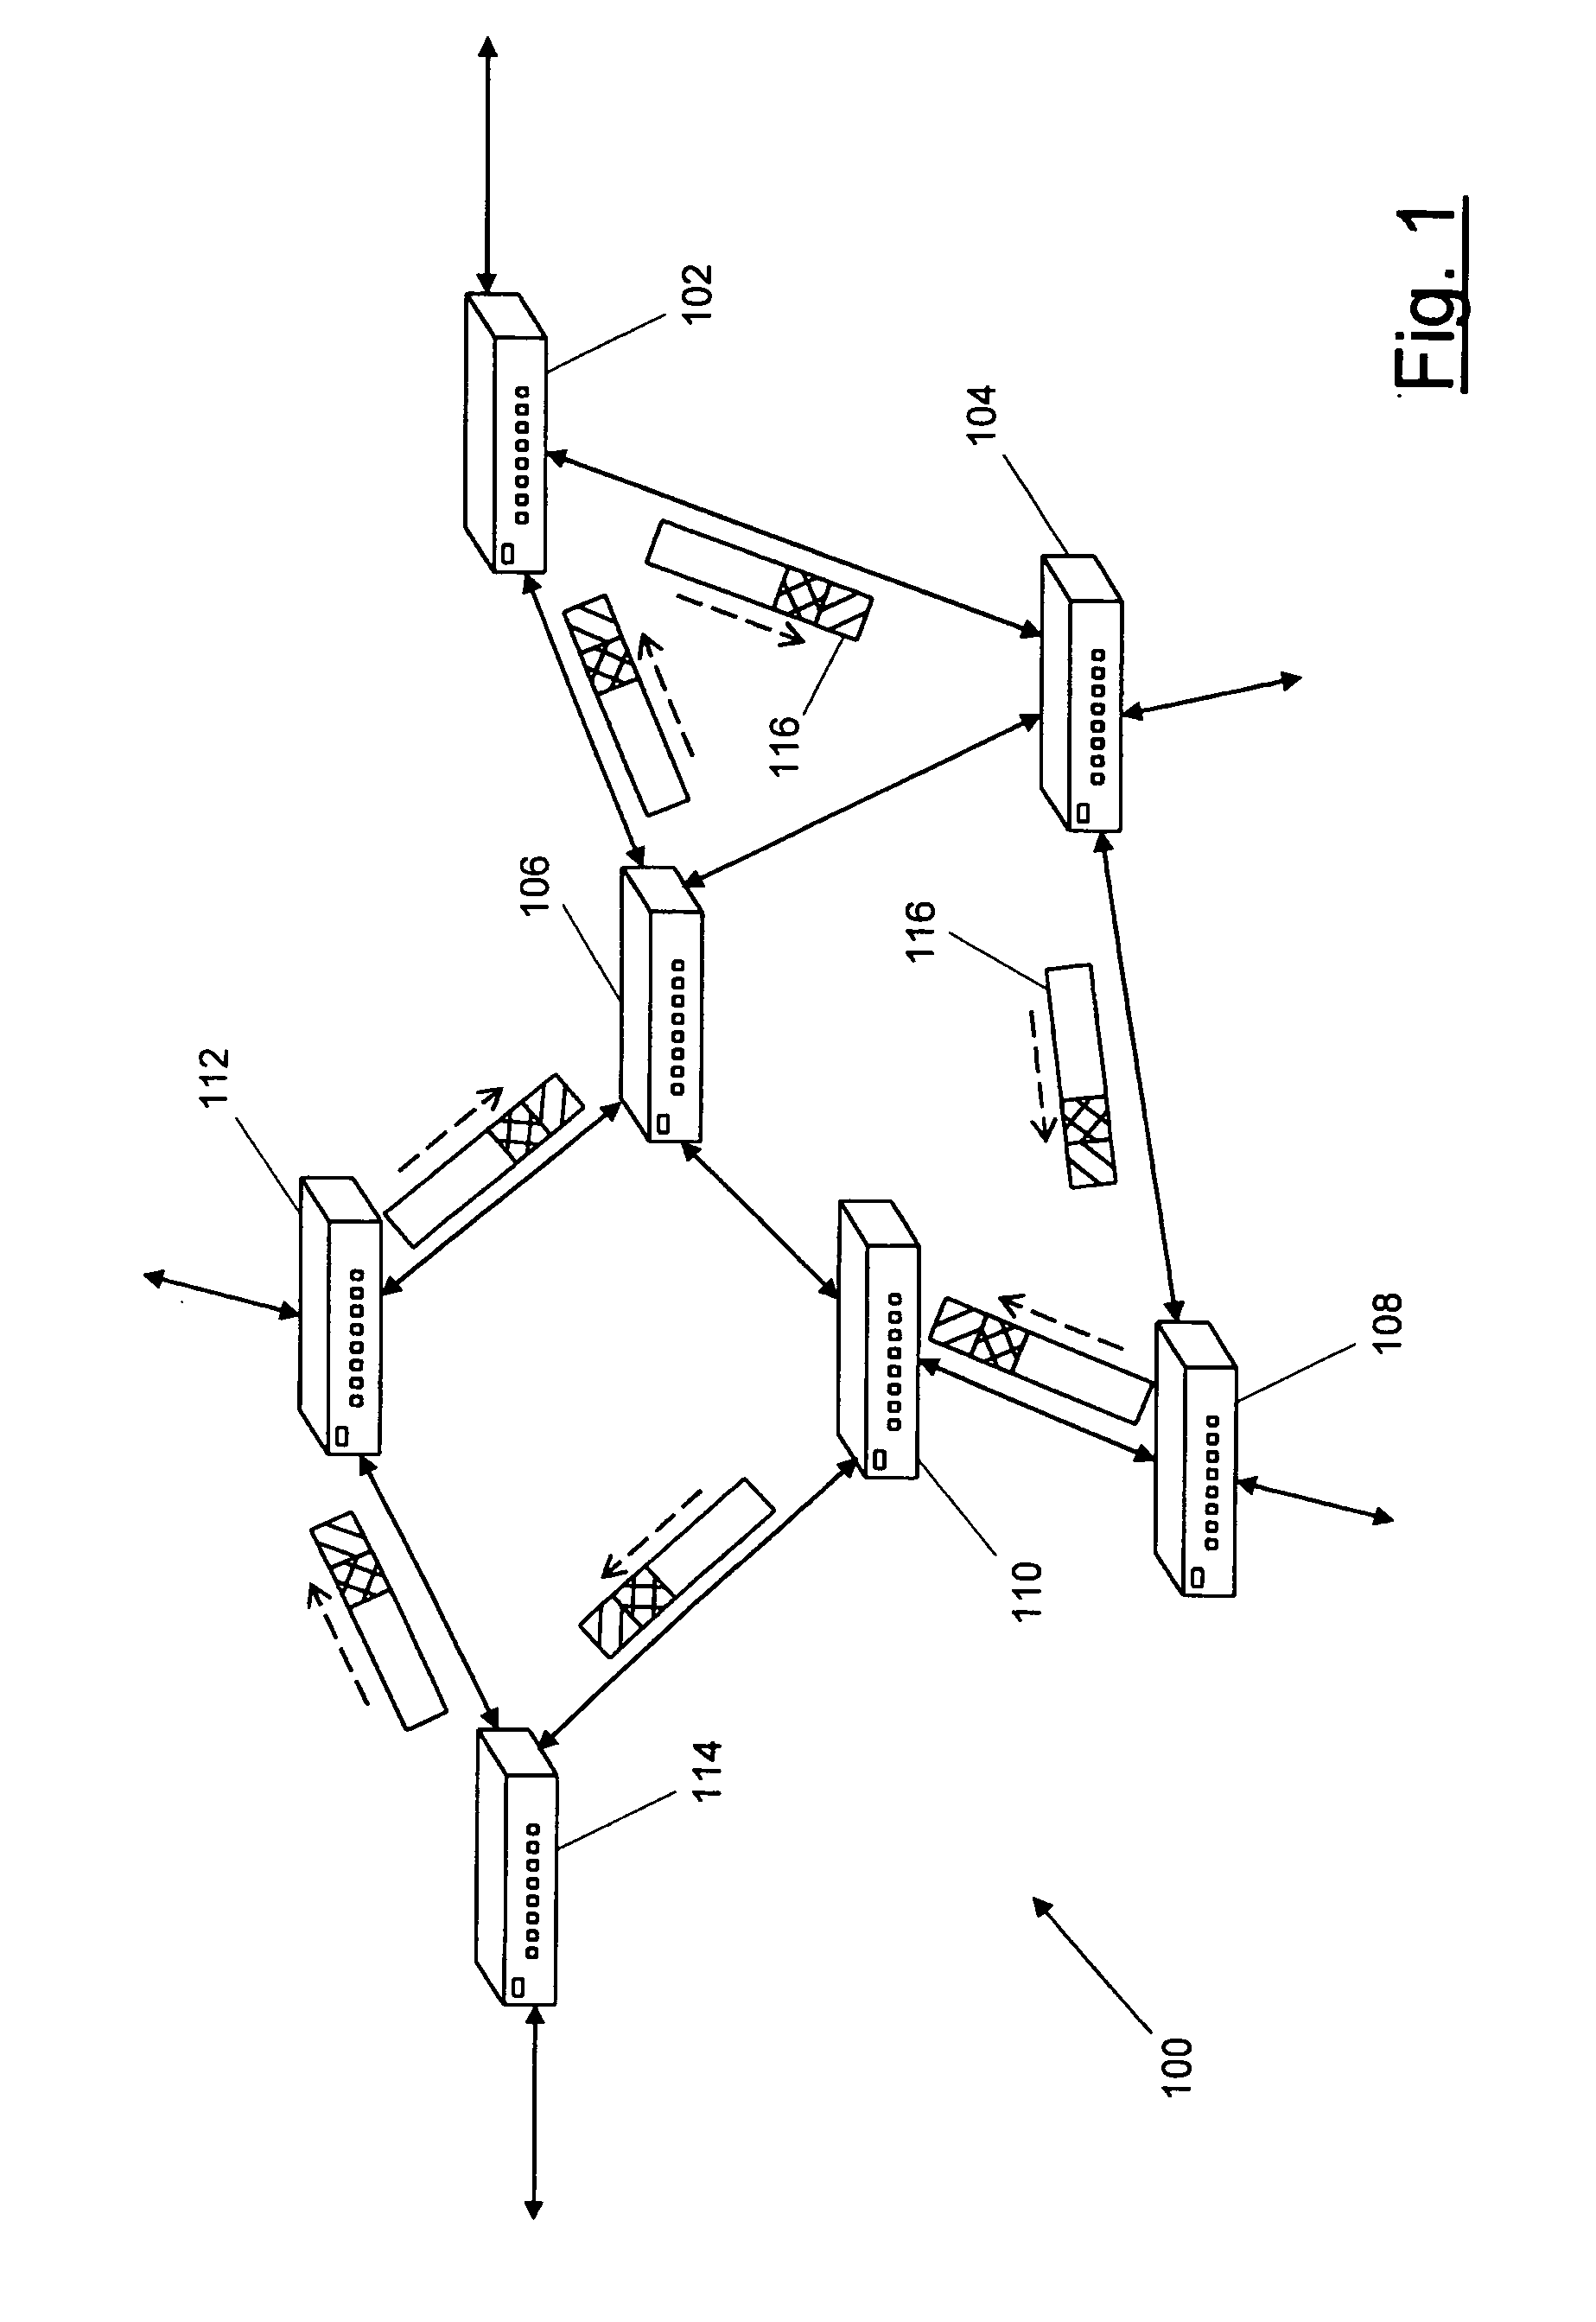 Method measuring a delay time metric and measurement system